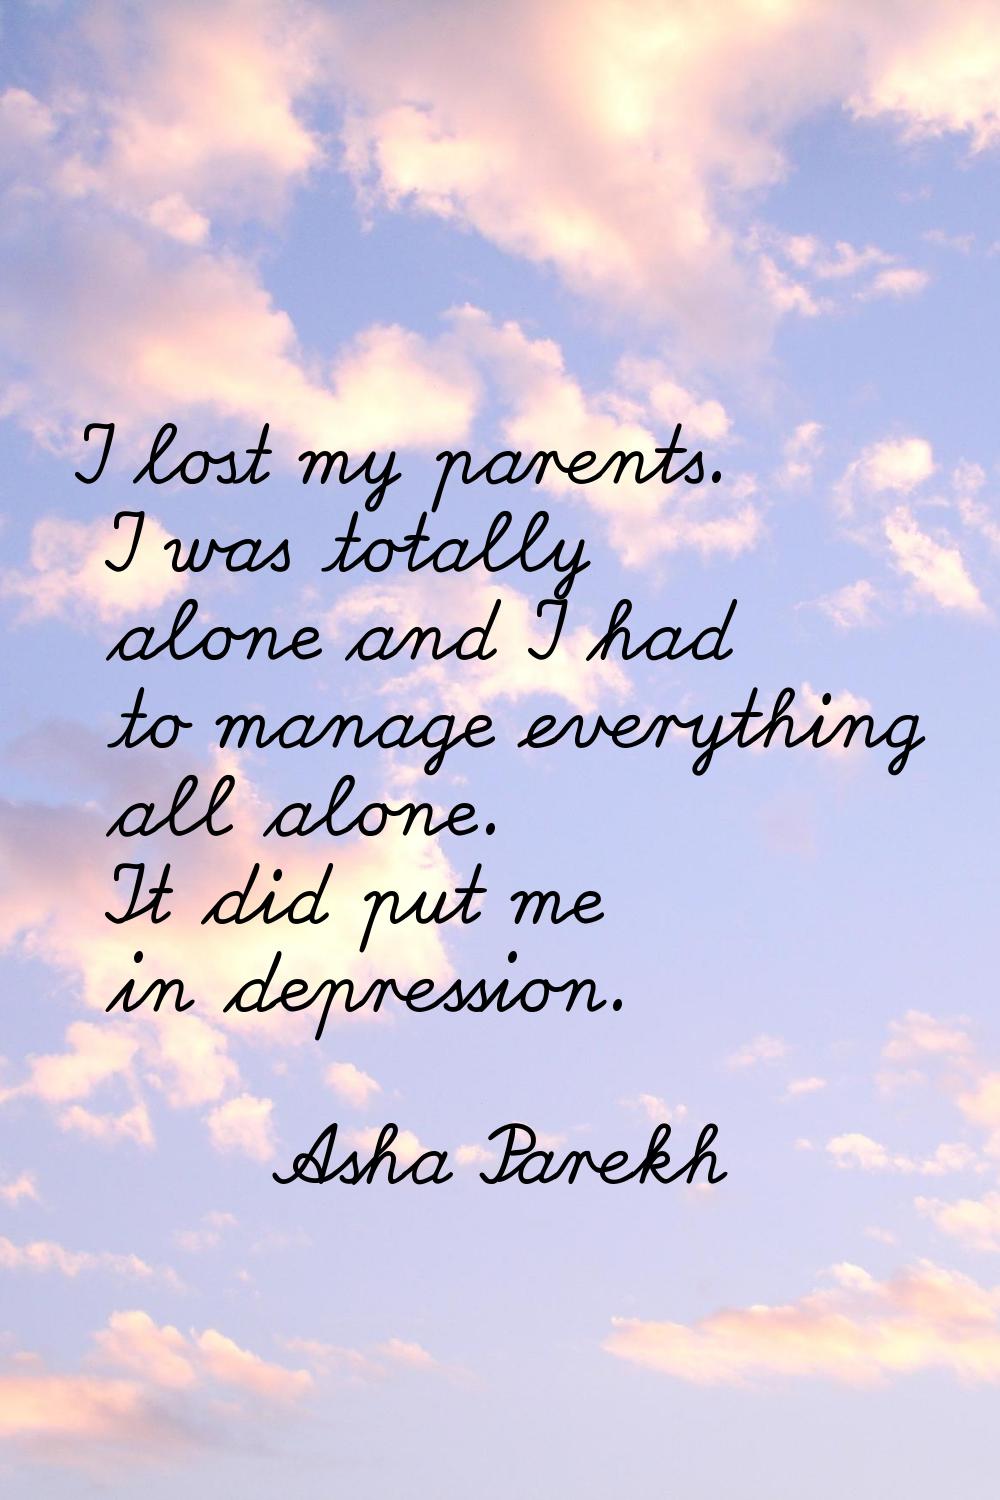 I lost my parents. I was totally alone and I had to manage everything all alone. It did put me in d